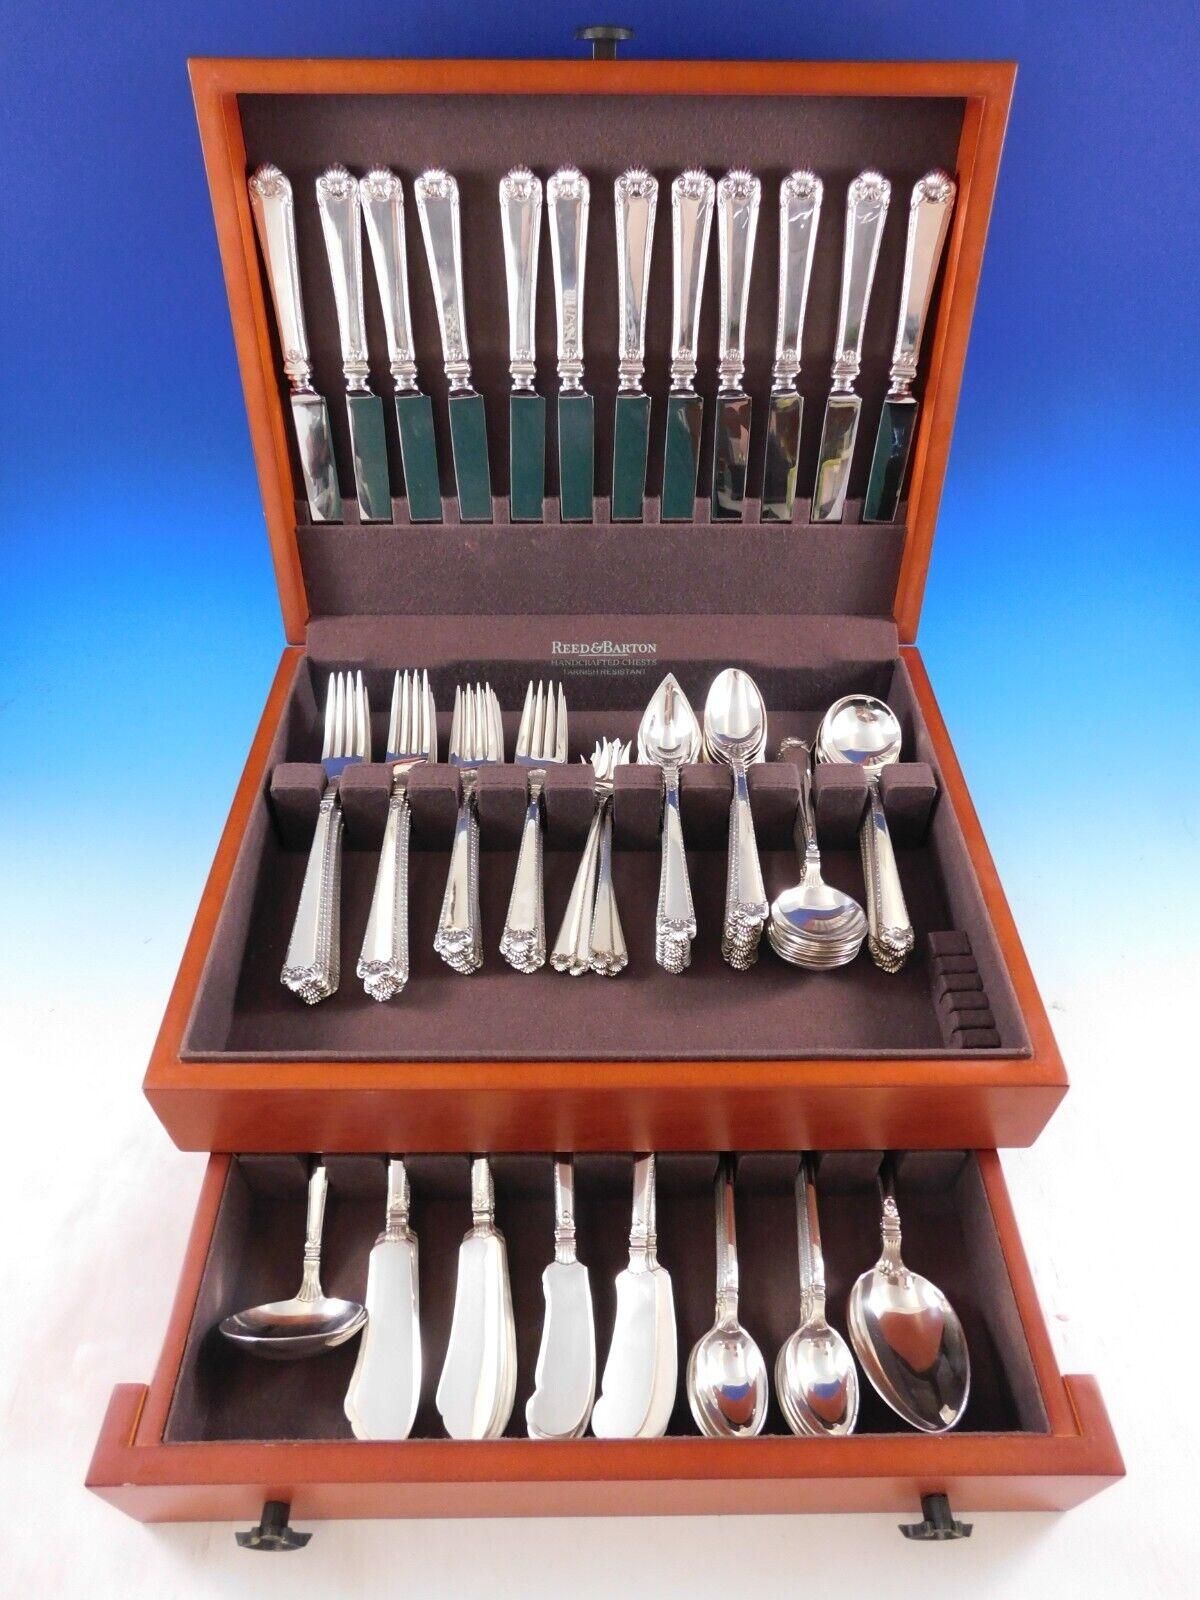 George II Rex Hand Chased by Watson sterling silver Flatware set, 123 pieces. This set includes:

12 Knives, 9 3/8